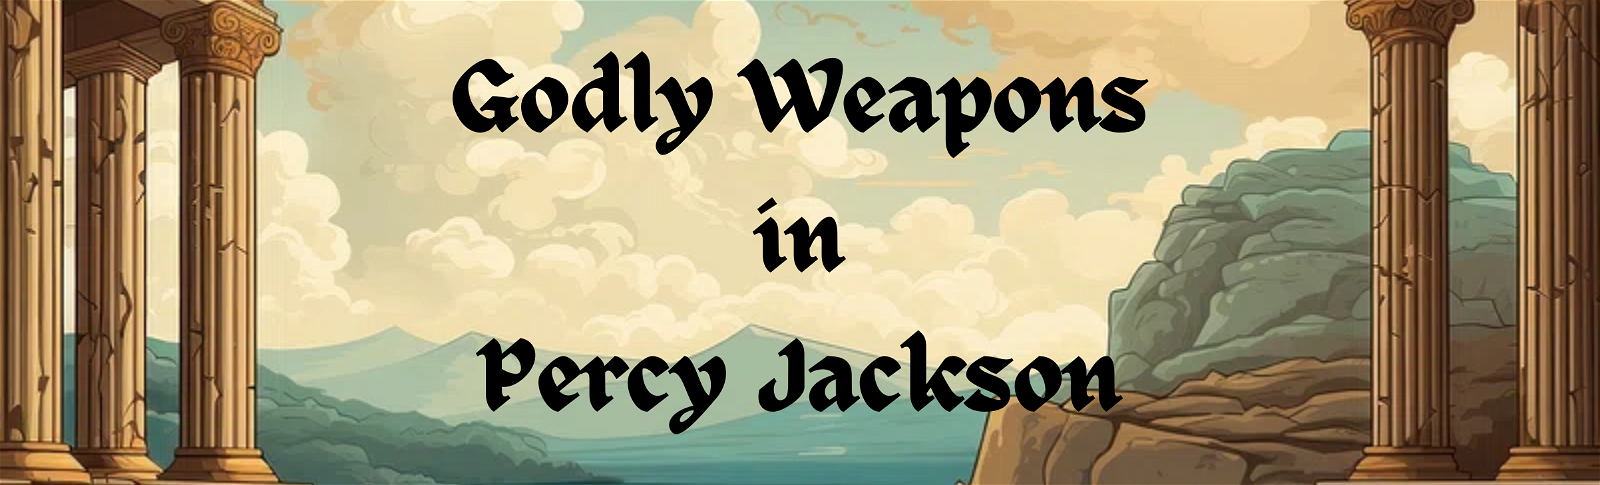 Godly Weapons in Percy Jackson